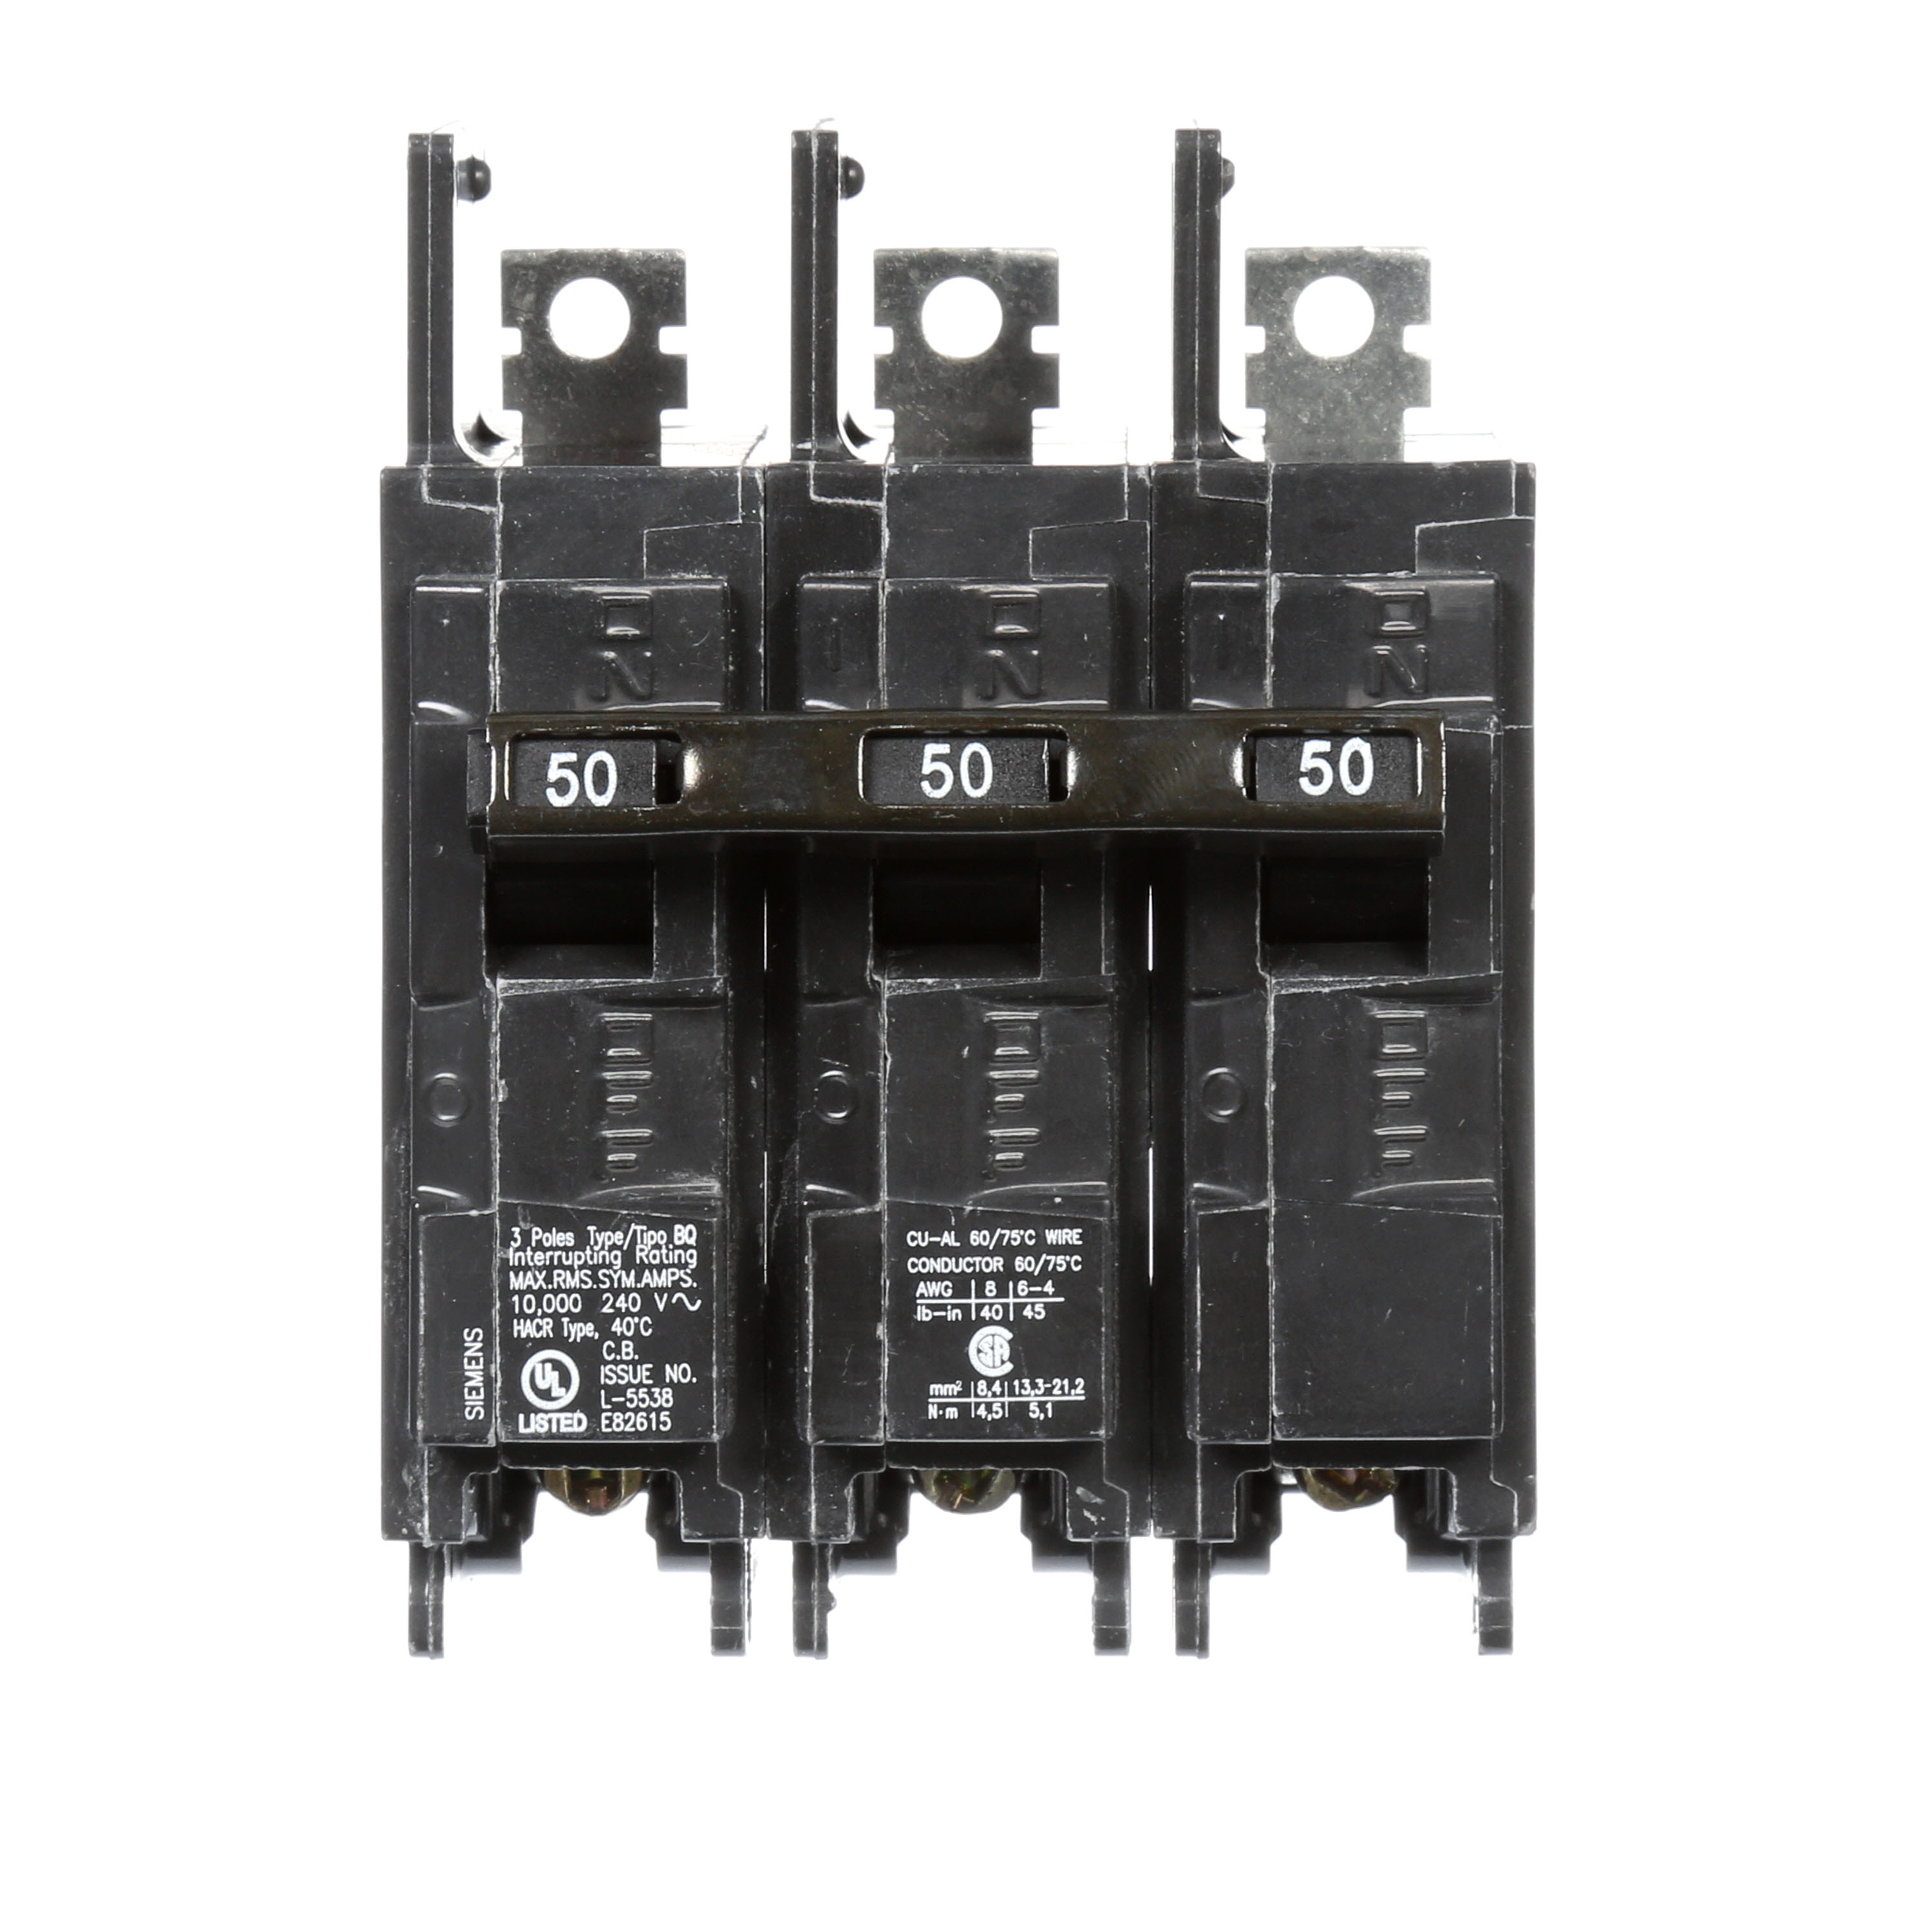 Siemens Low Voltage Molded Case Circuit Breakers General Purpose MCCBs are Circuit Protection Molded Case Circuit Breakers. 3-Pole Common-Trip circuit breaker type BQ. Rated 240V (050A) (AIR 10 kA). Special features Load side lugs are included.